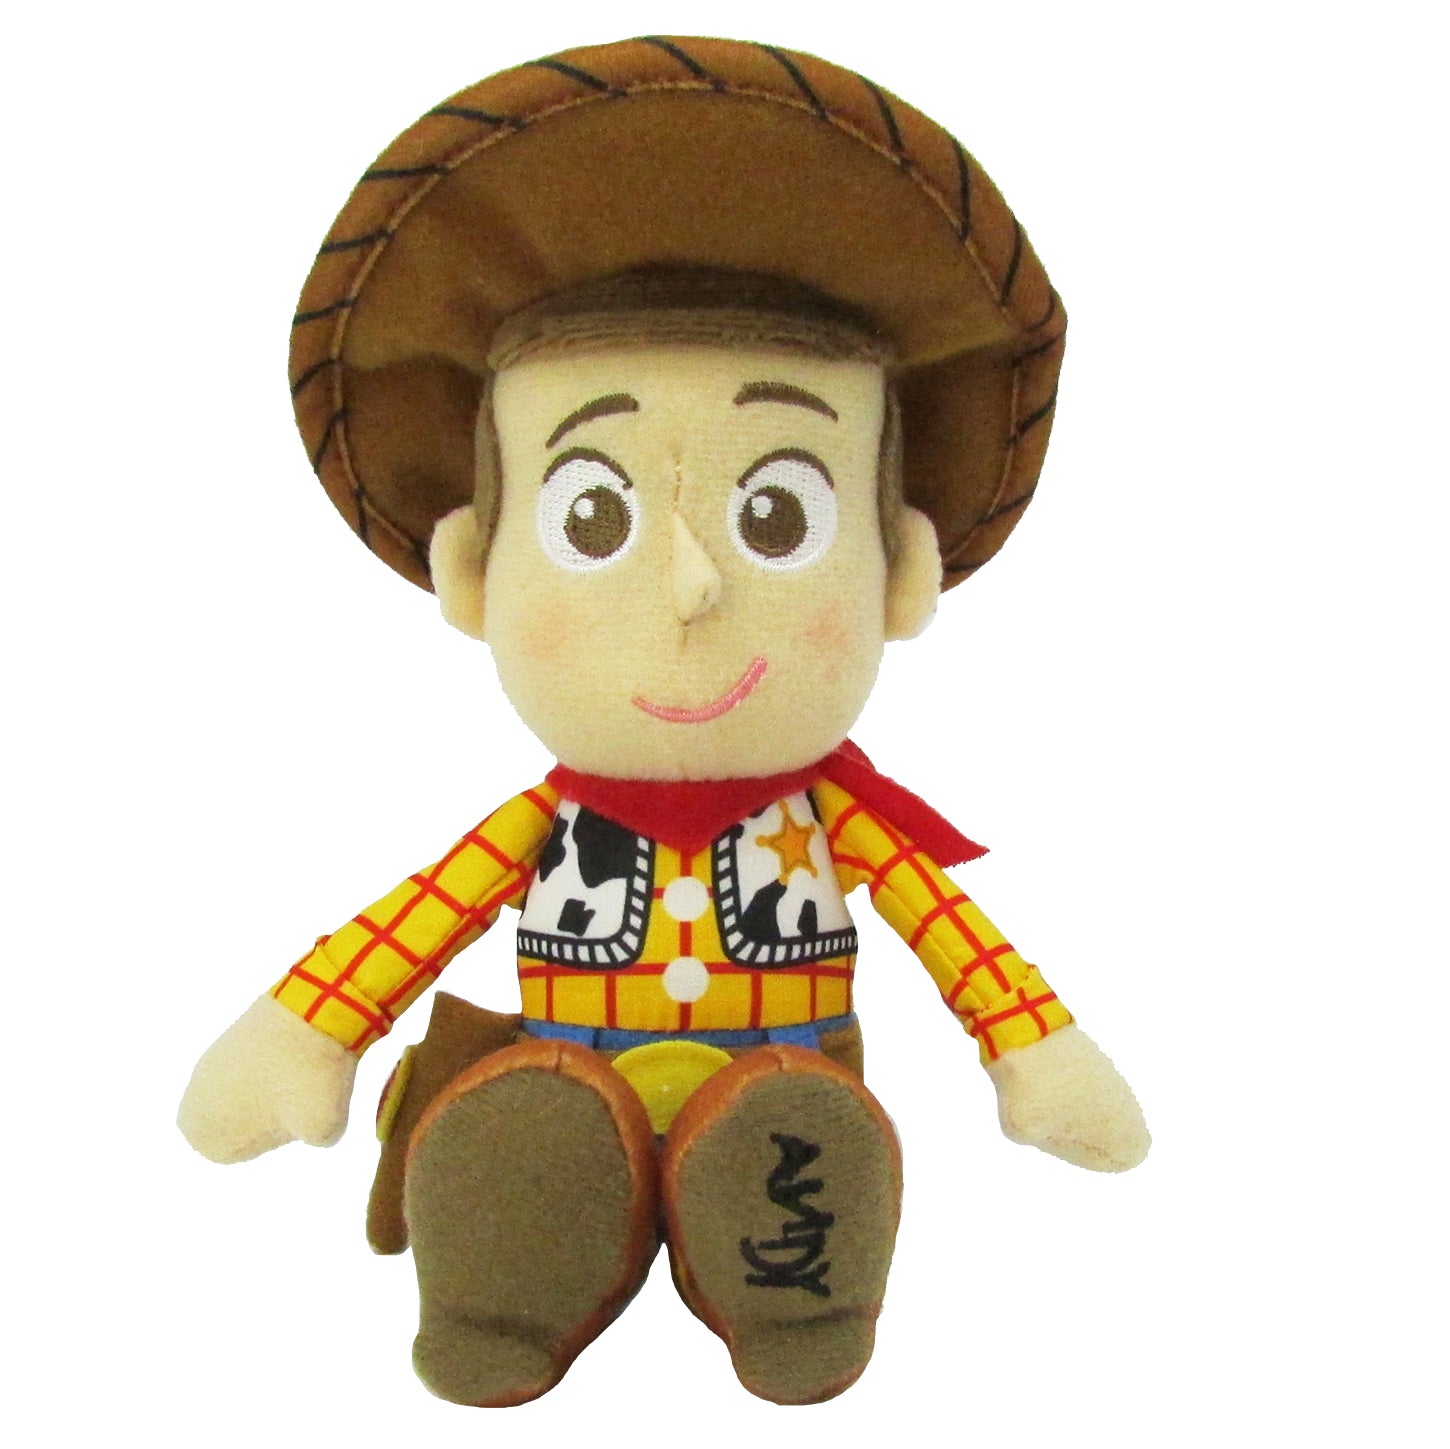 toy story woody plush doll